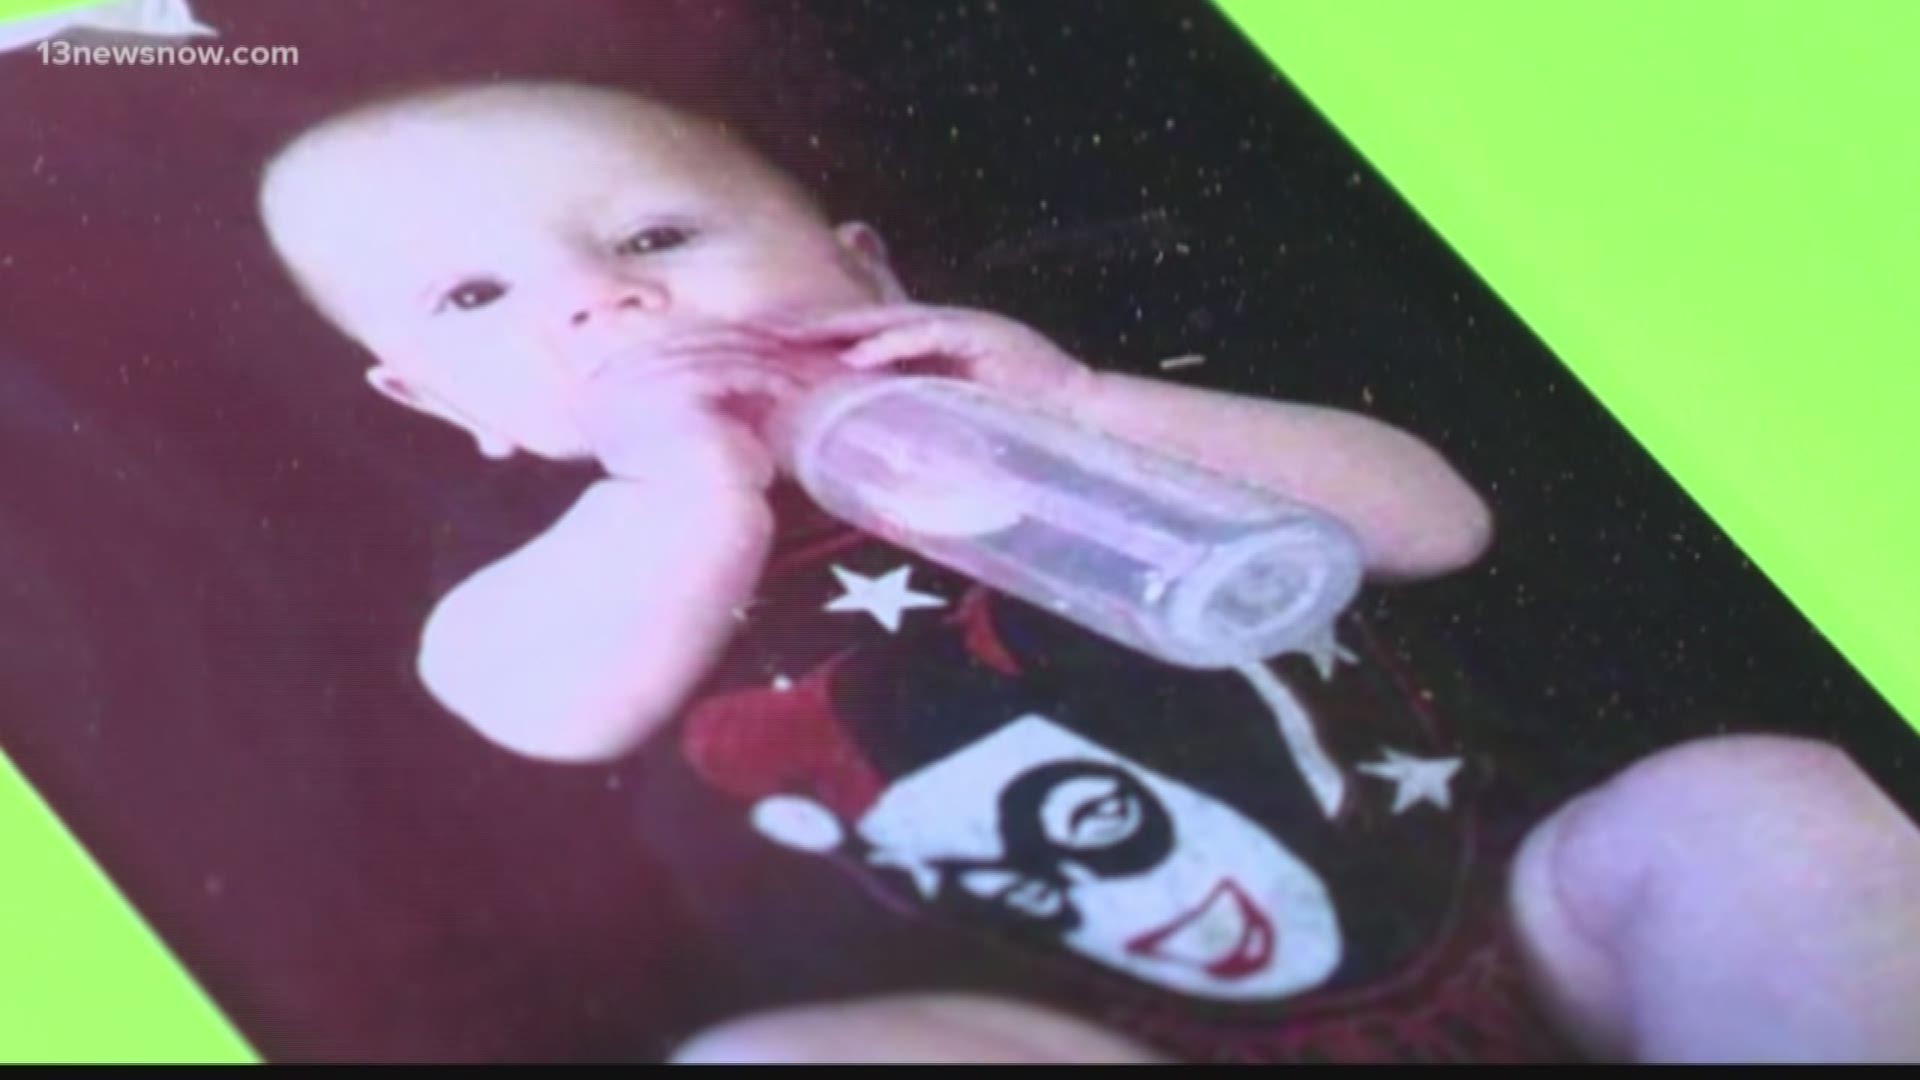 13News Now Investigative Reporter Laura Geller looks into court documents that raise questions about how probation officers were making sure a man charged in the child abuse death of a two-year-old in Norfolk was not a danger to another child.